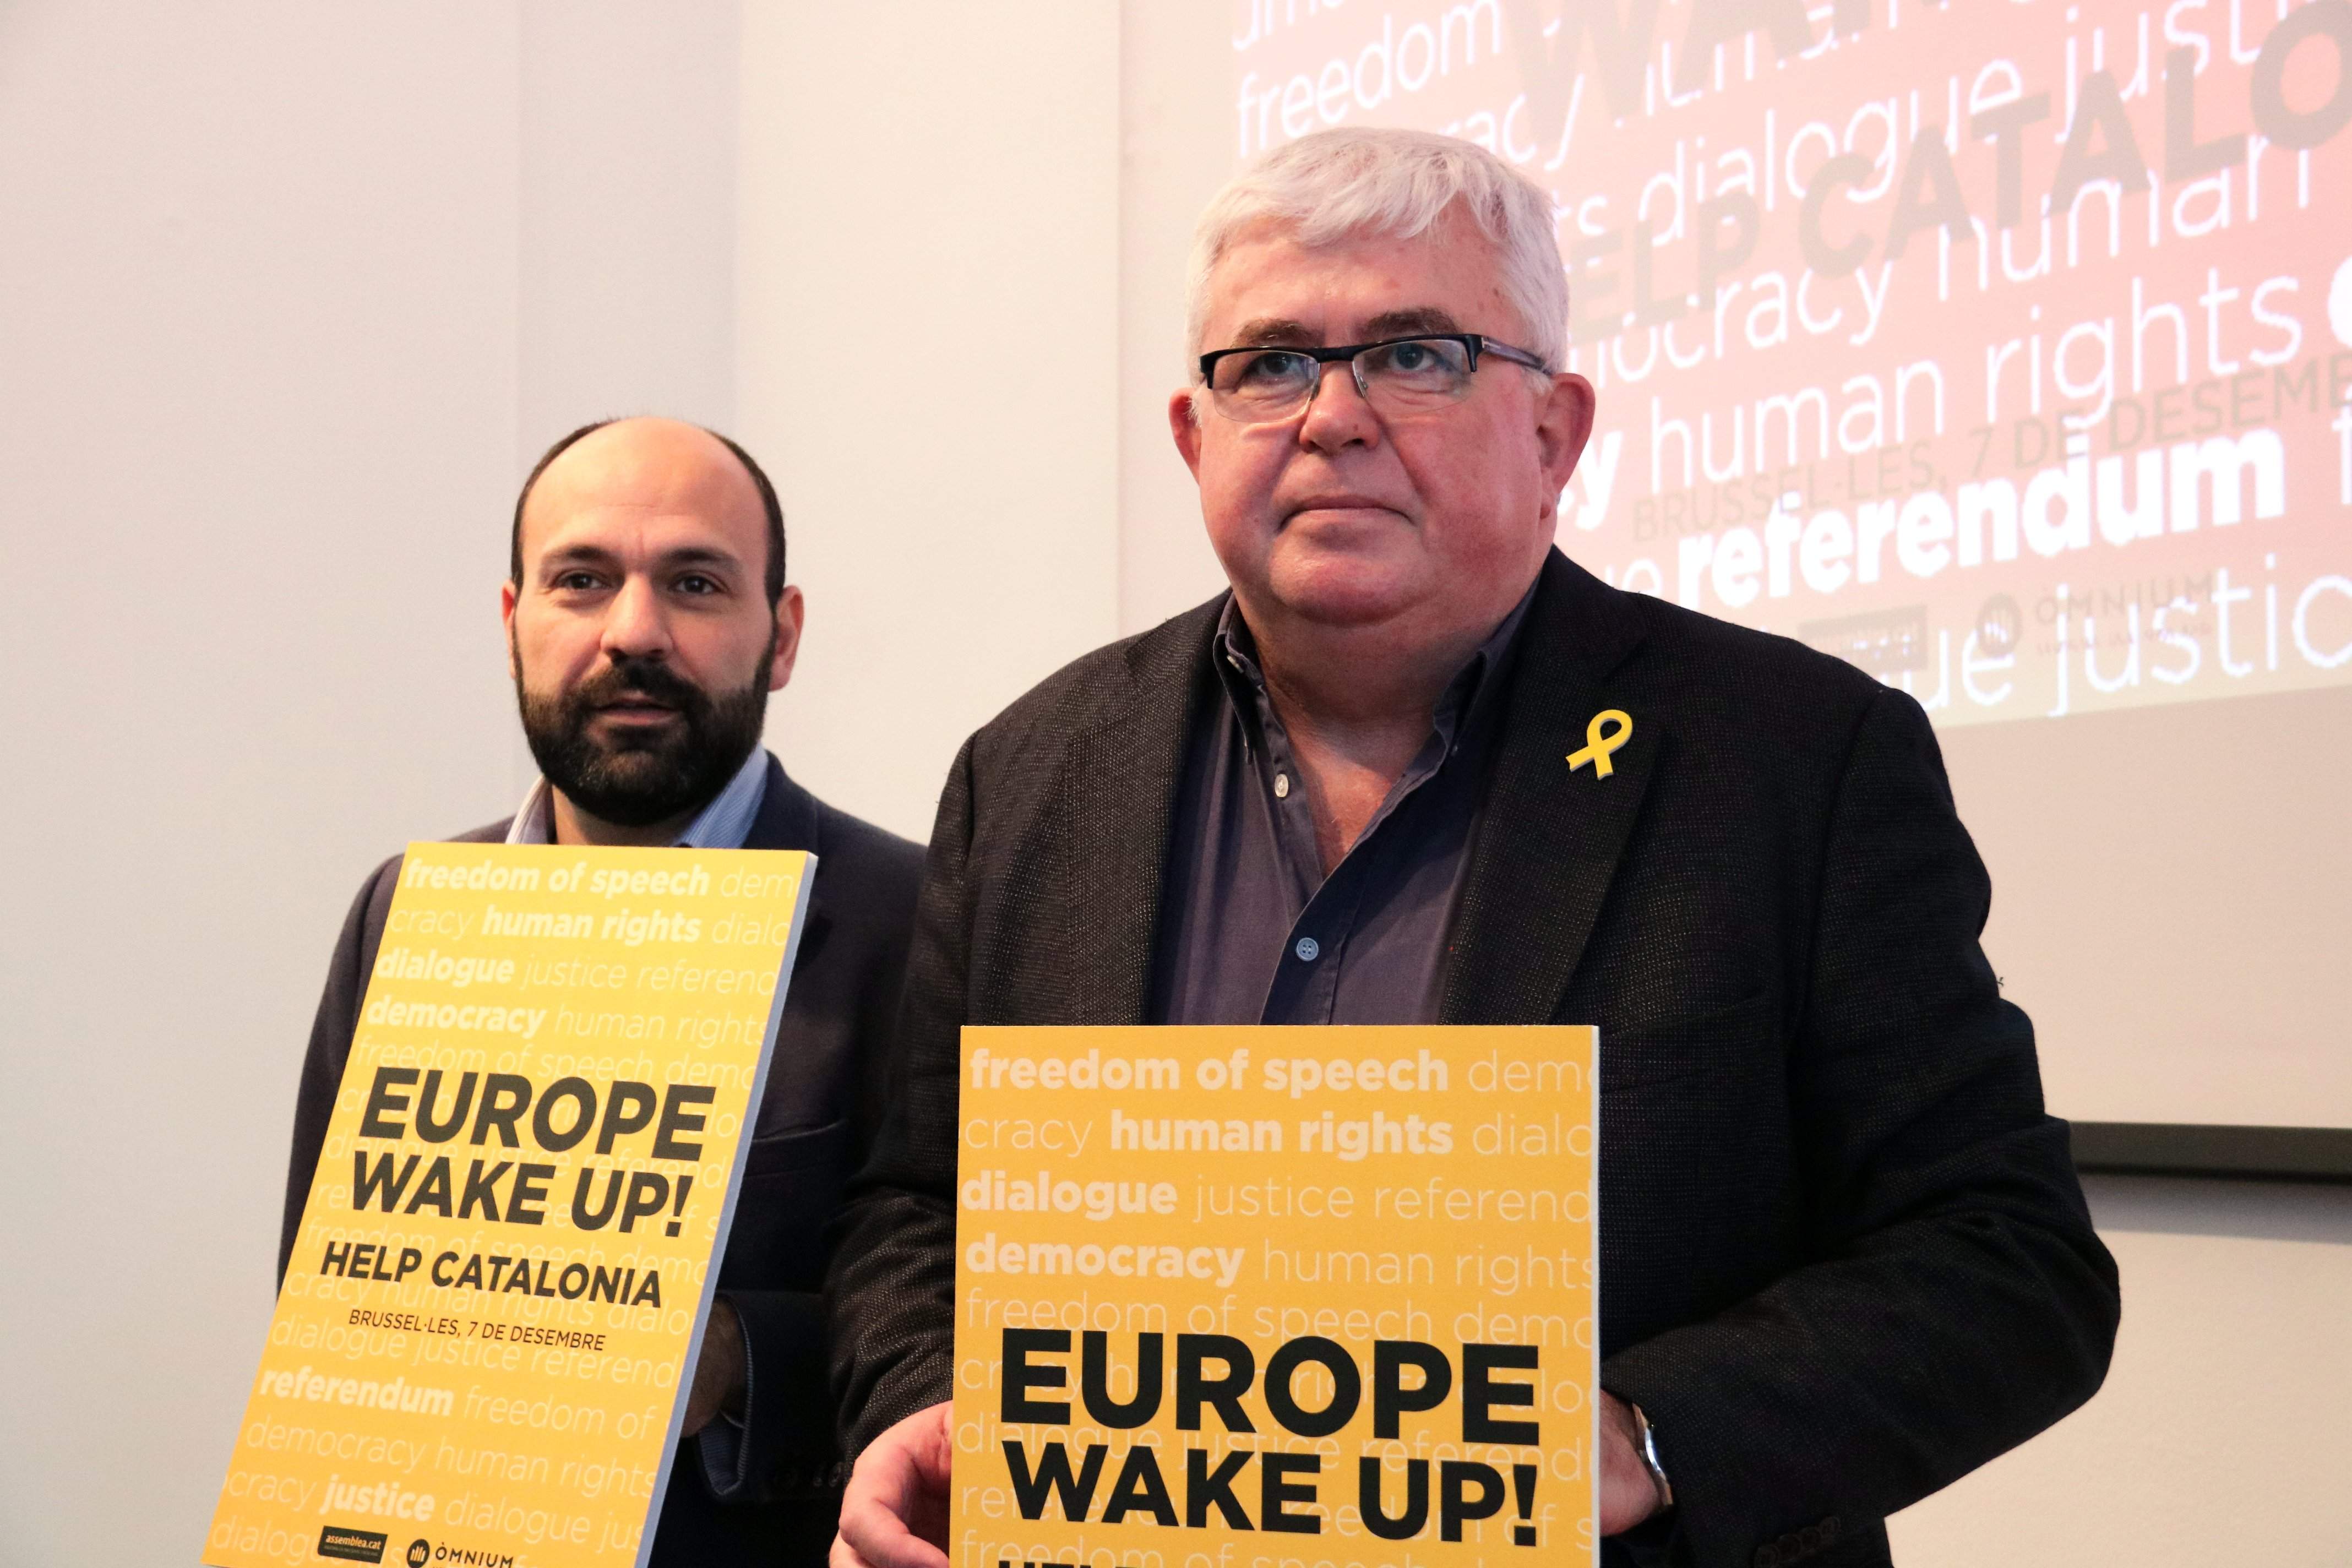 'Europe, Wake up!' the Catalan demonstration in Brussels on 7th December